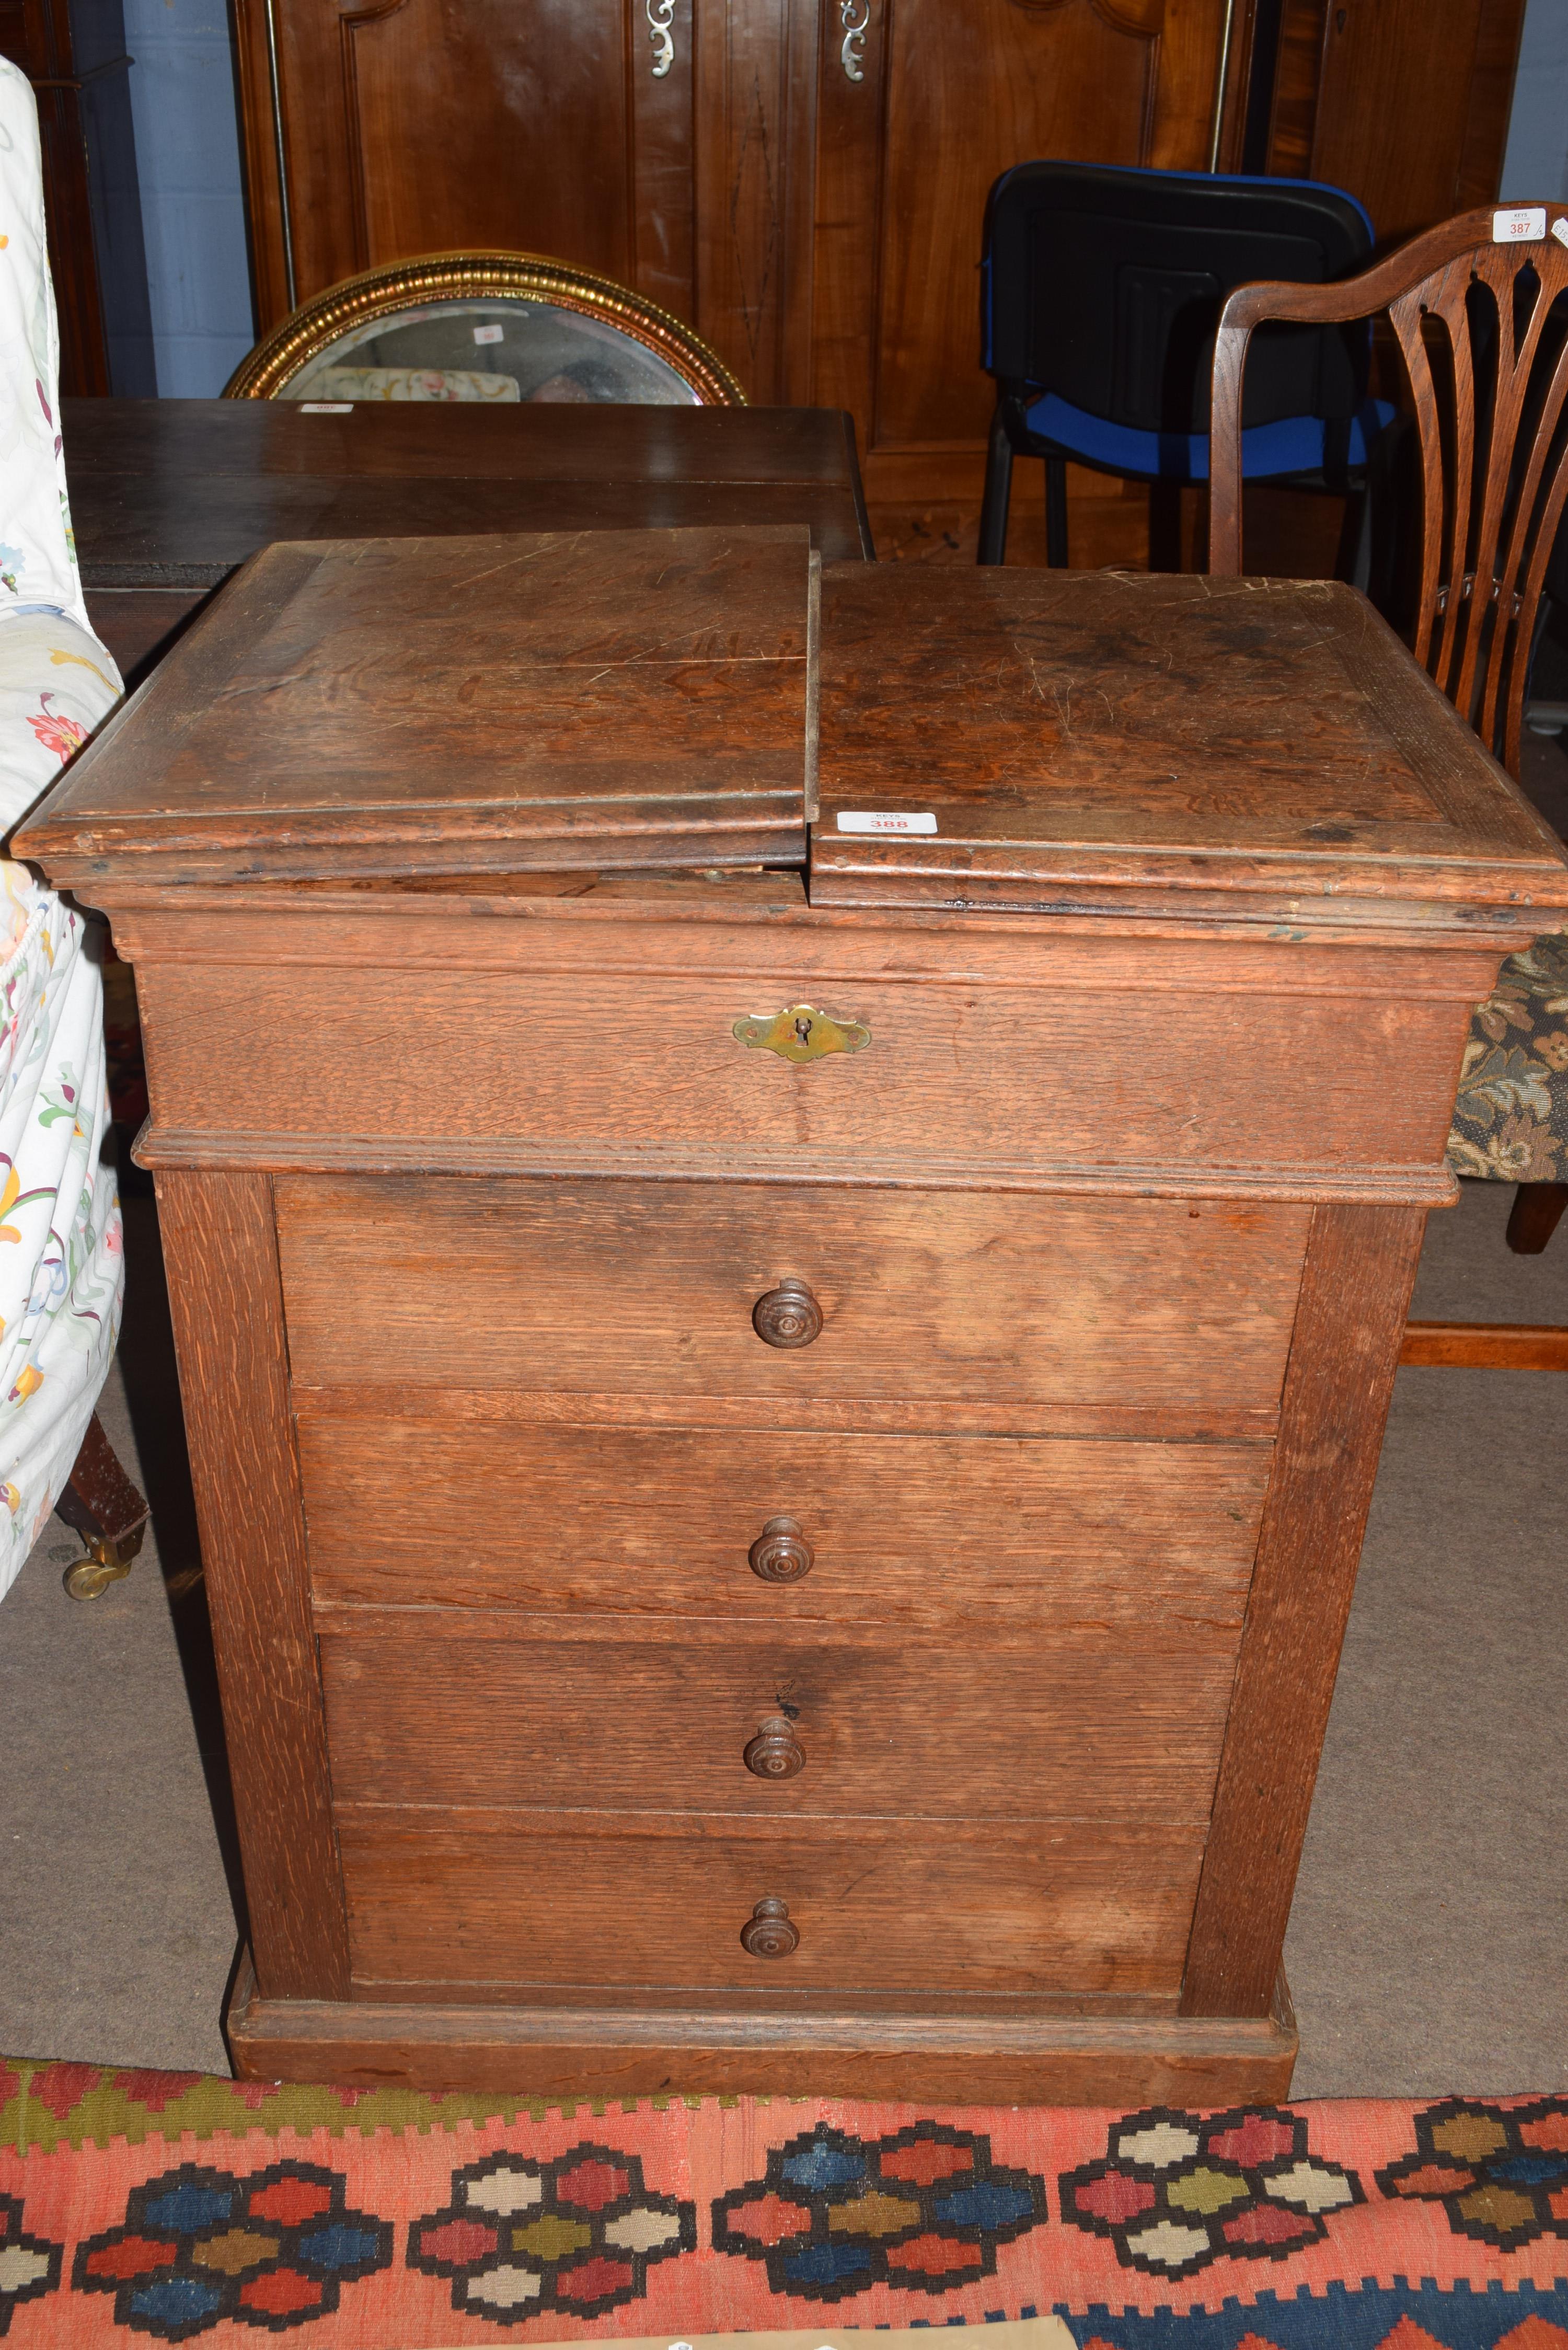 Late 19th century oak shop cabinet with fold-up lid opening to reveal an area containing mixing tub,